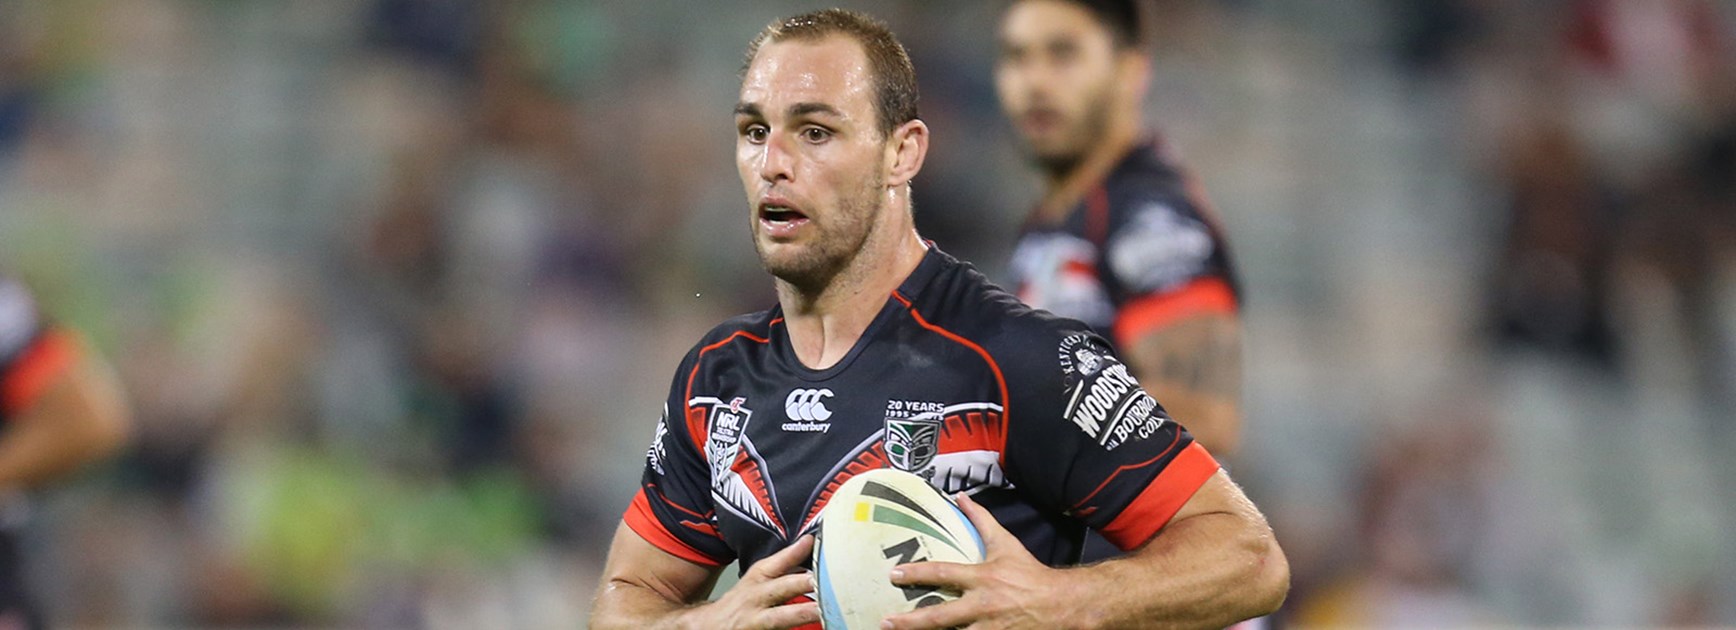 Simon Mannering is the surprise NRL Fantasy leader and a must-have if you can afford him.